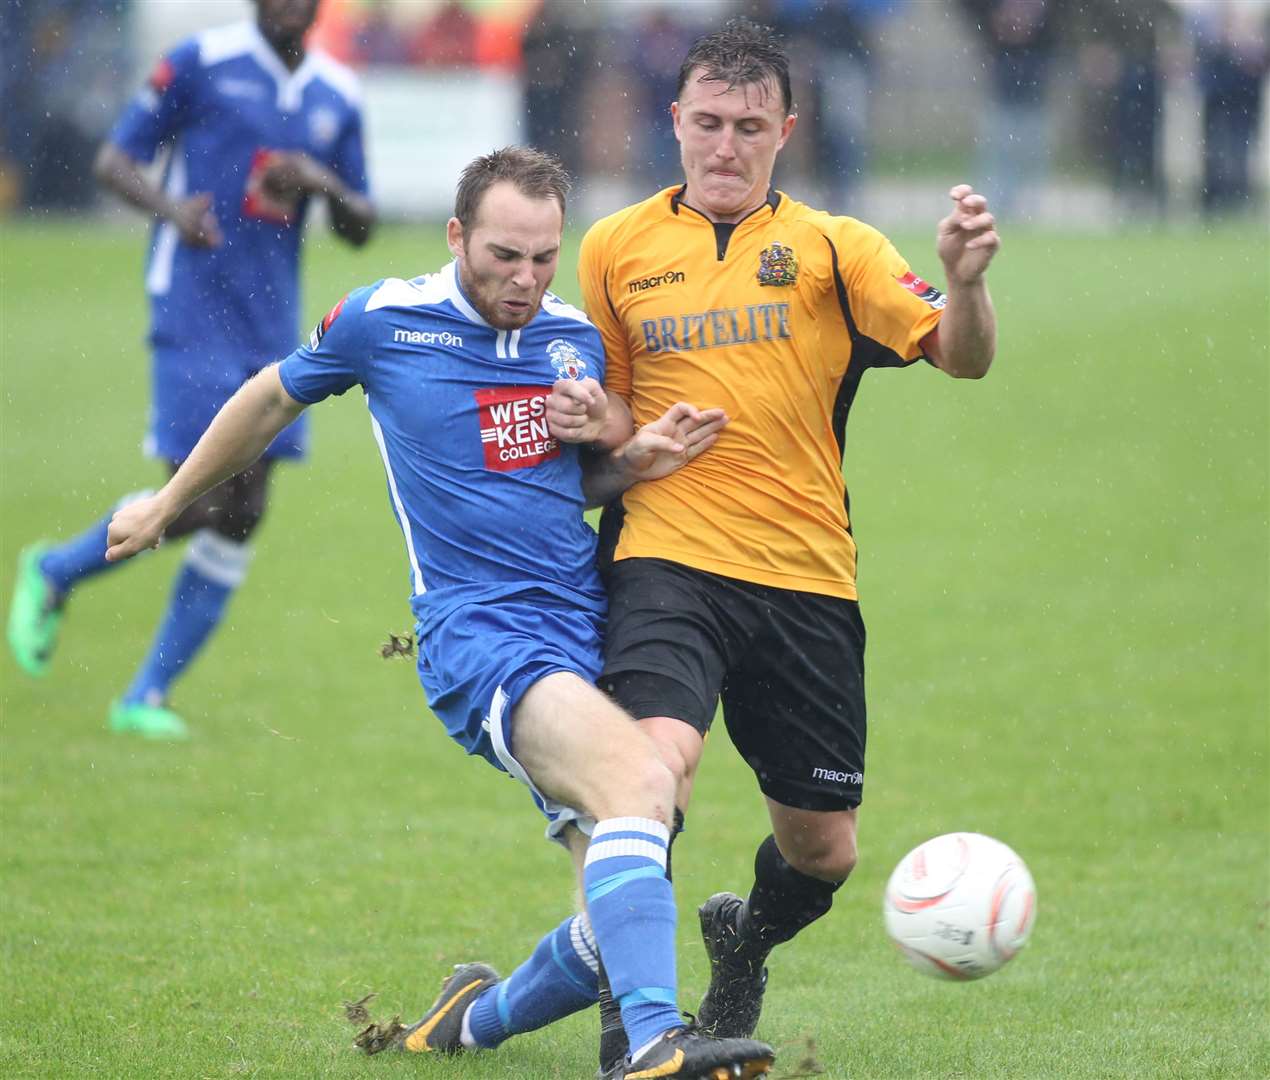 Charlie Slocombe, who died two years ago, pictured playing for Tonbridge Angels against Maidstone United in a big derby game at Longmead Stadium in Tonbridge in August 2014. Picture: John Westhrop